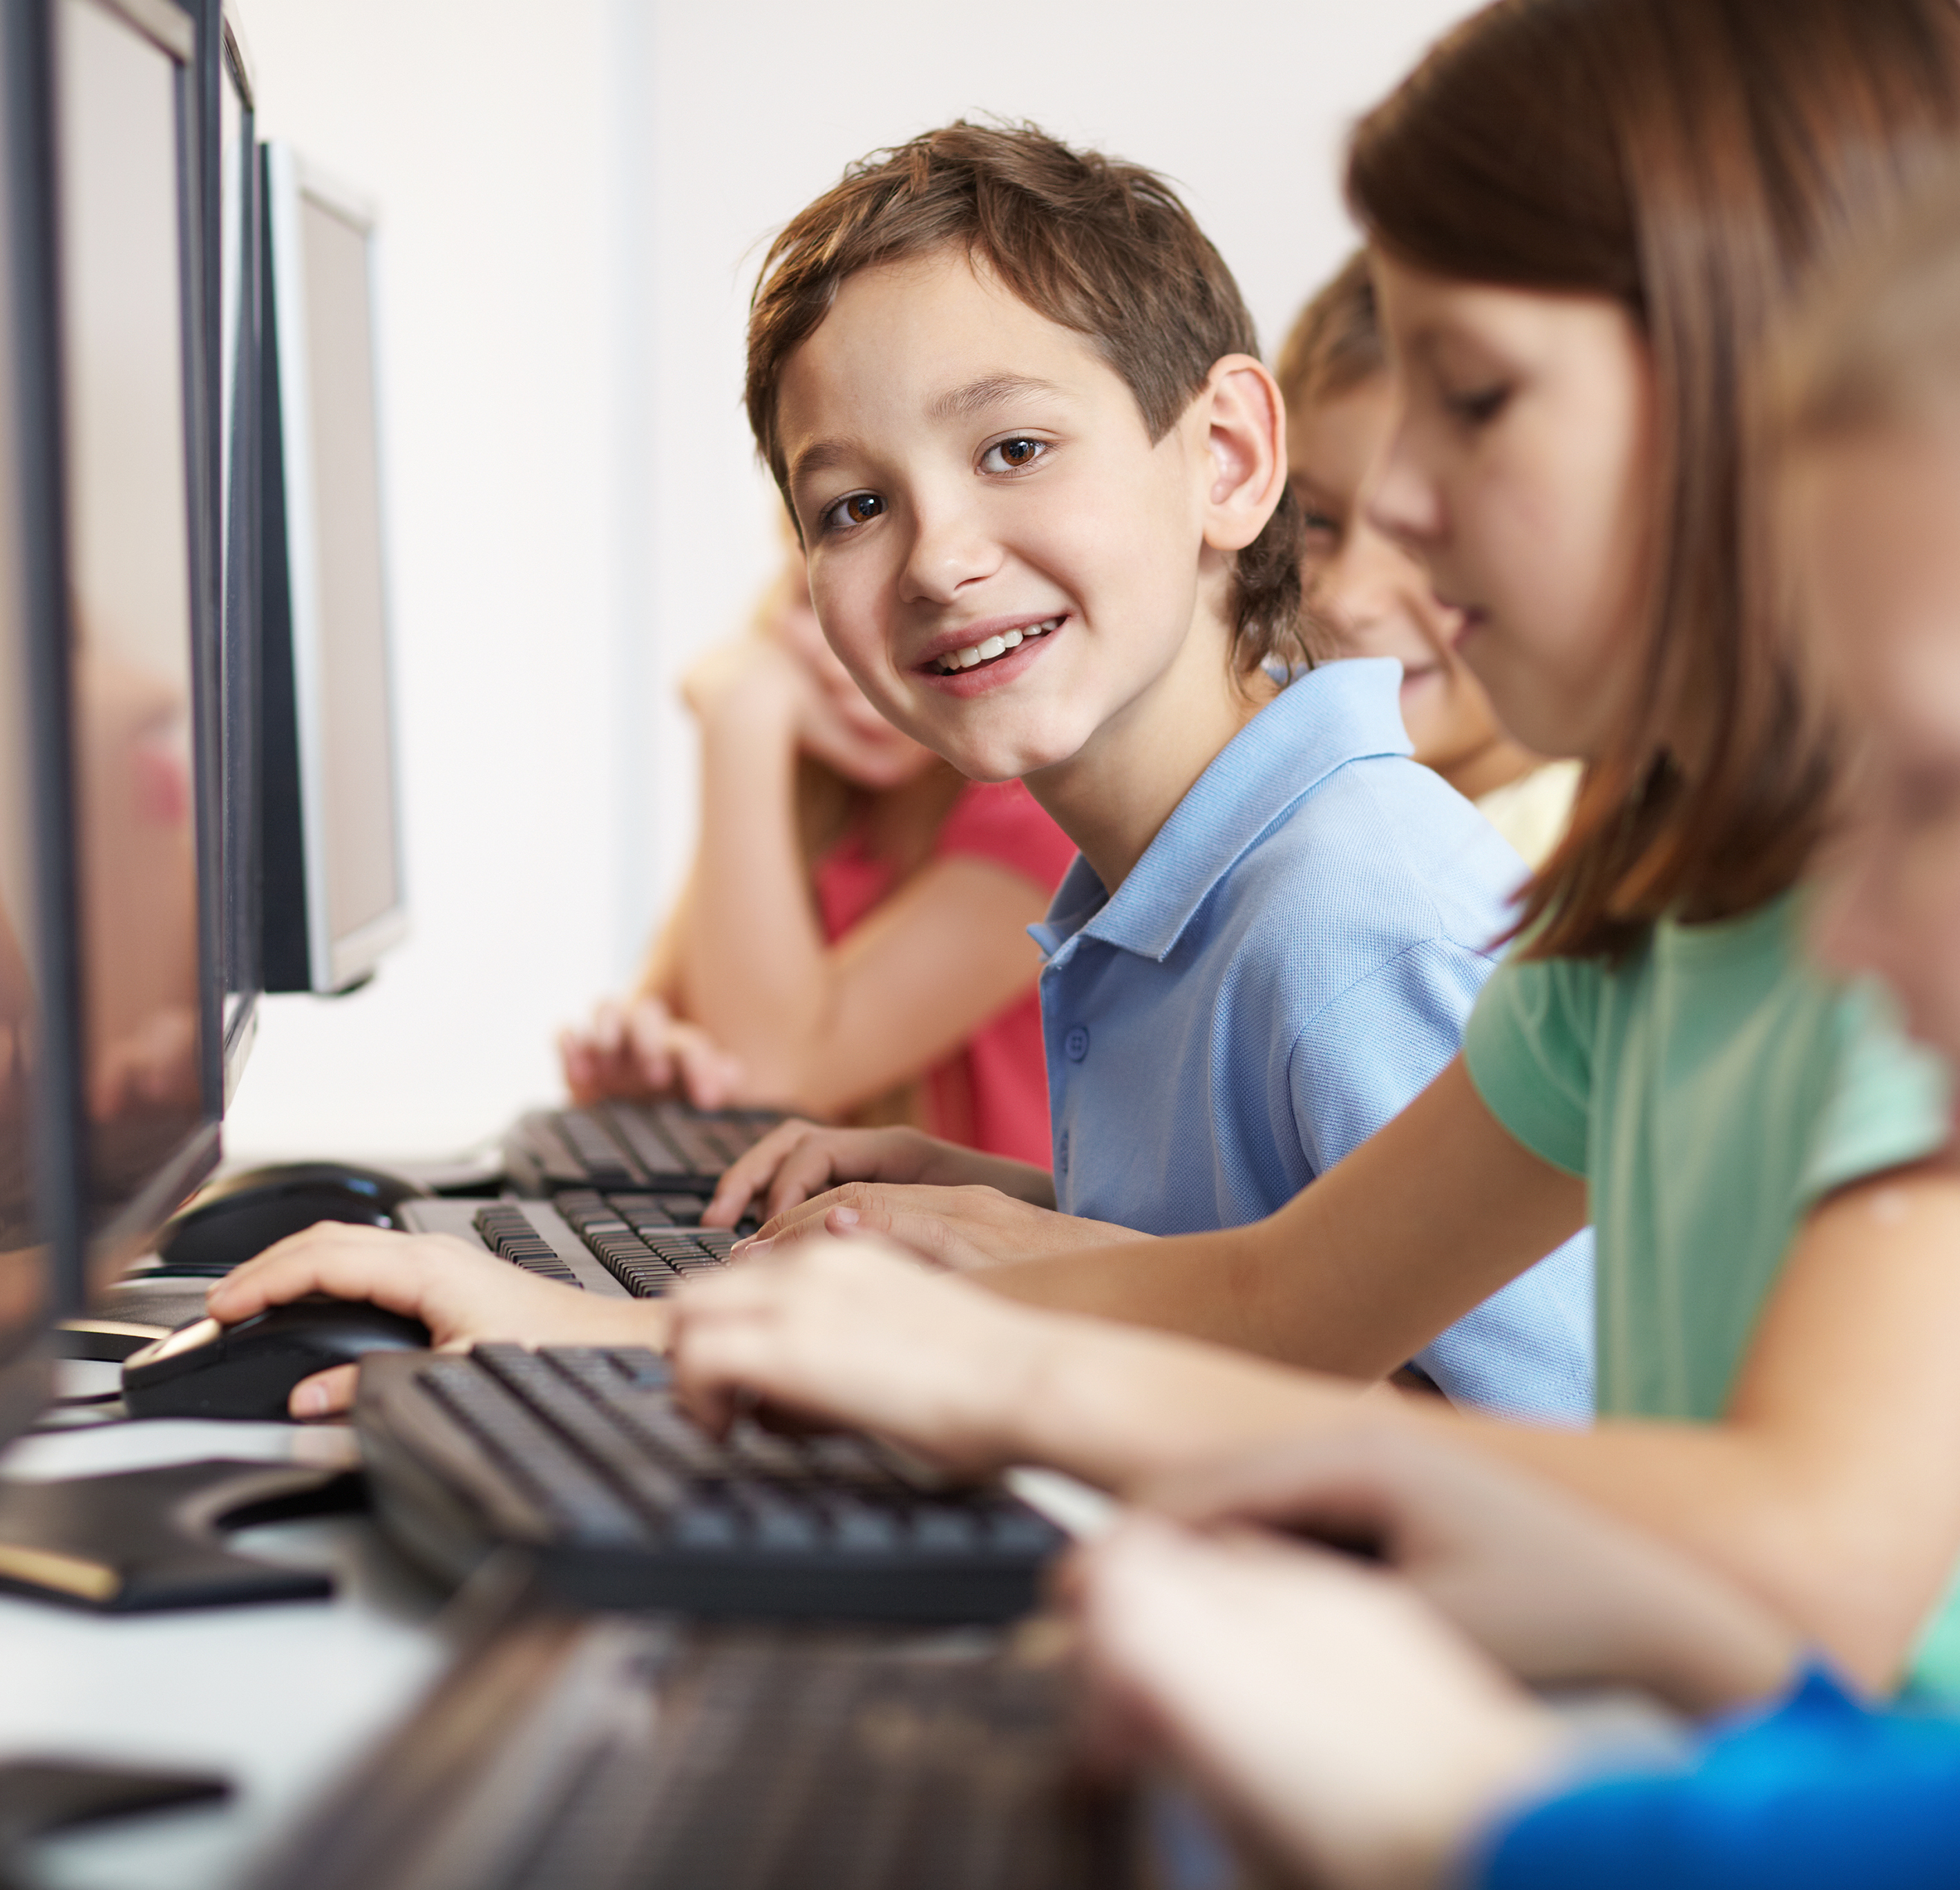 A picture of kids on computers